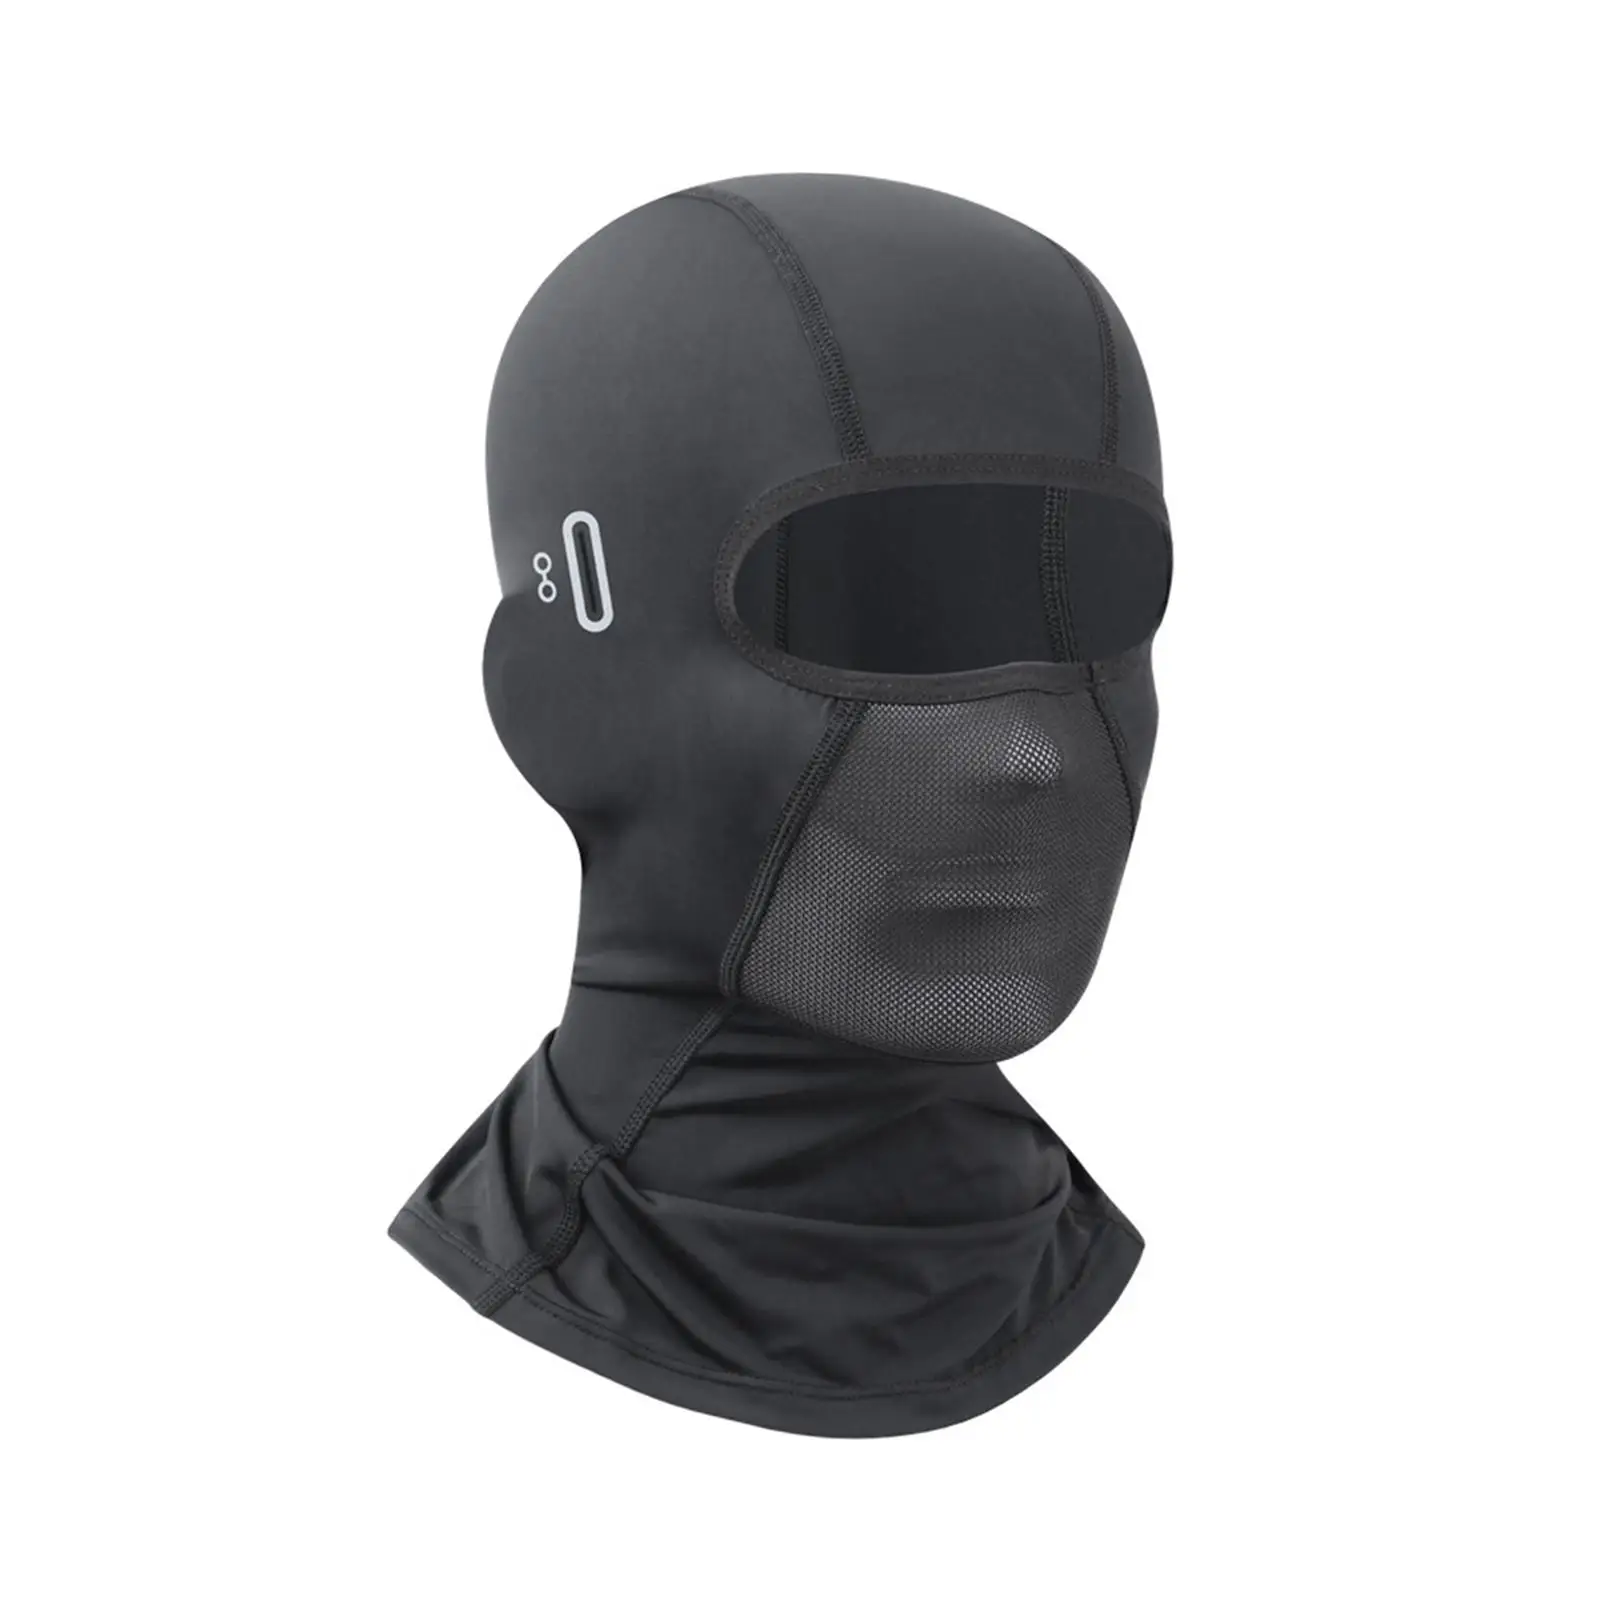 Balaclava Face Mask Summer Cooling Motorcycle Scarf Ski Mask Neck Warmer for Outdoor Riding Ski Snowboarding Motorcycle Cycling